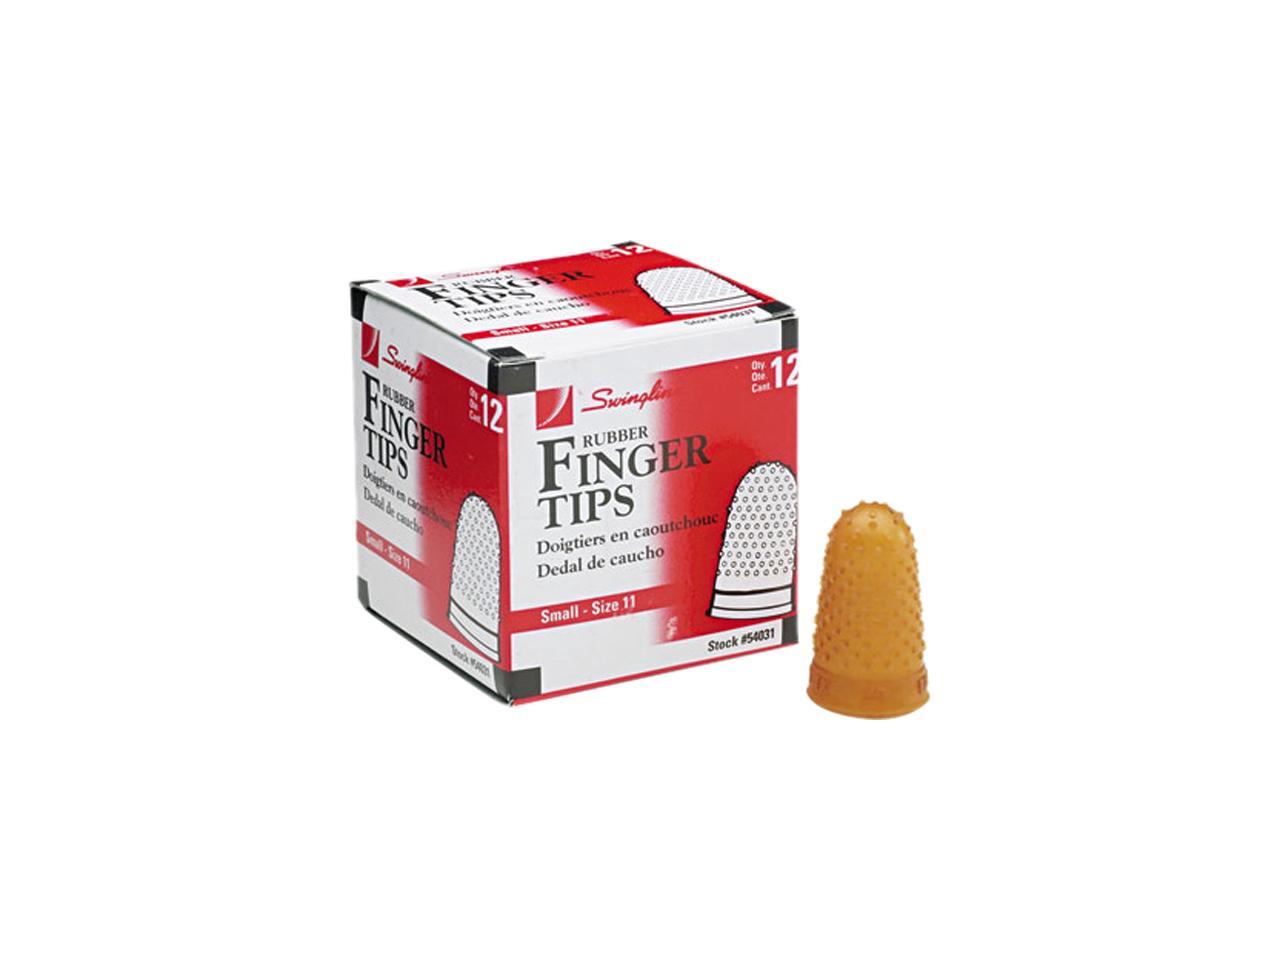 12/Pack Medium/Large Size 12 Rubber Finger Tips Swingline Products 24 Tips Total Swingline Set of 2 Amber 